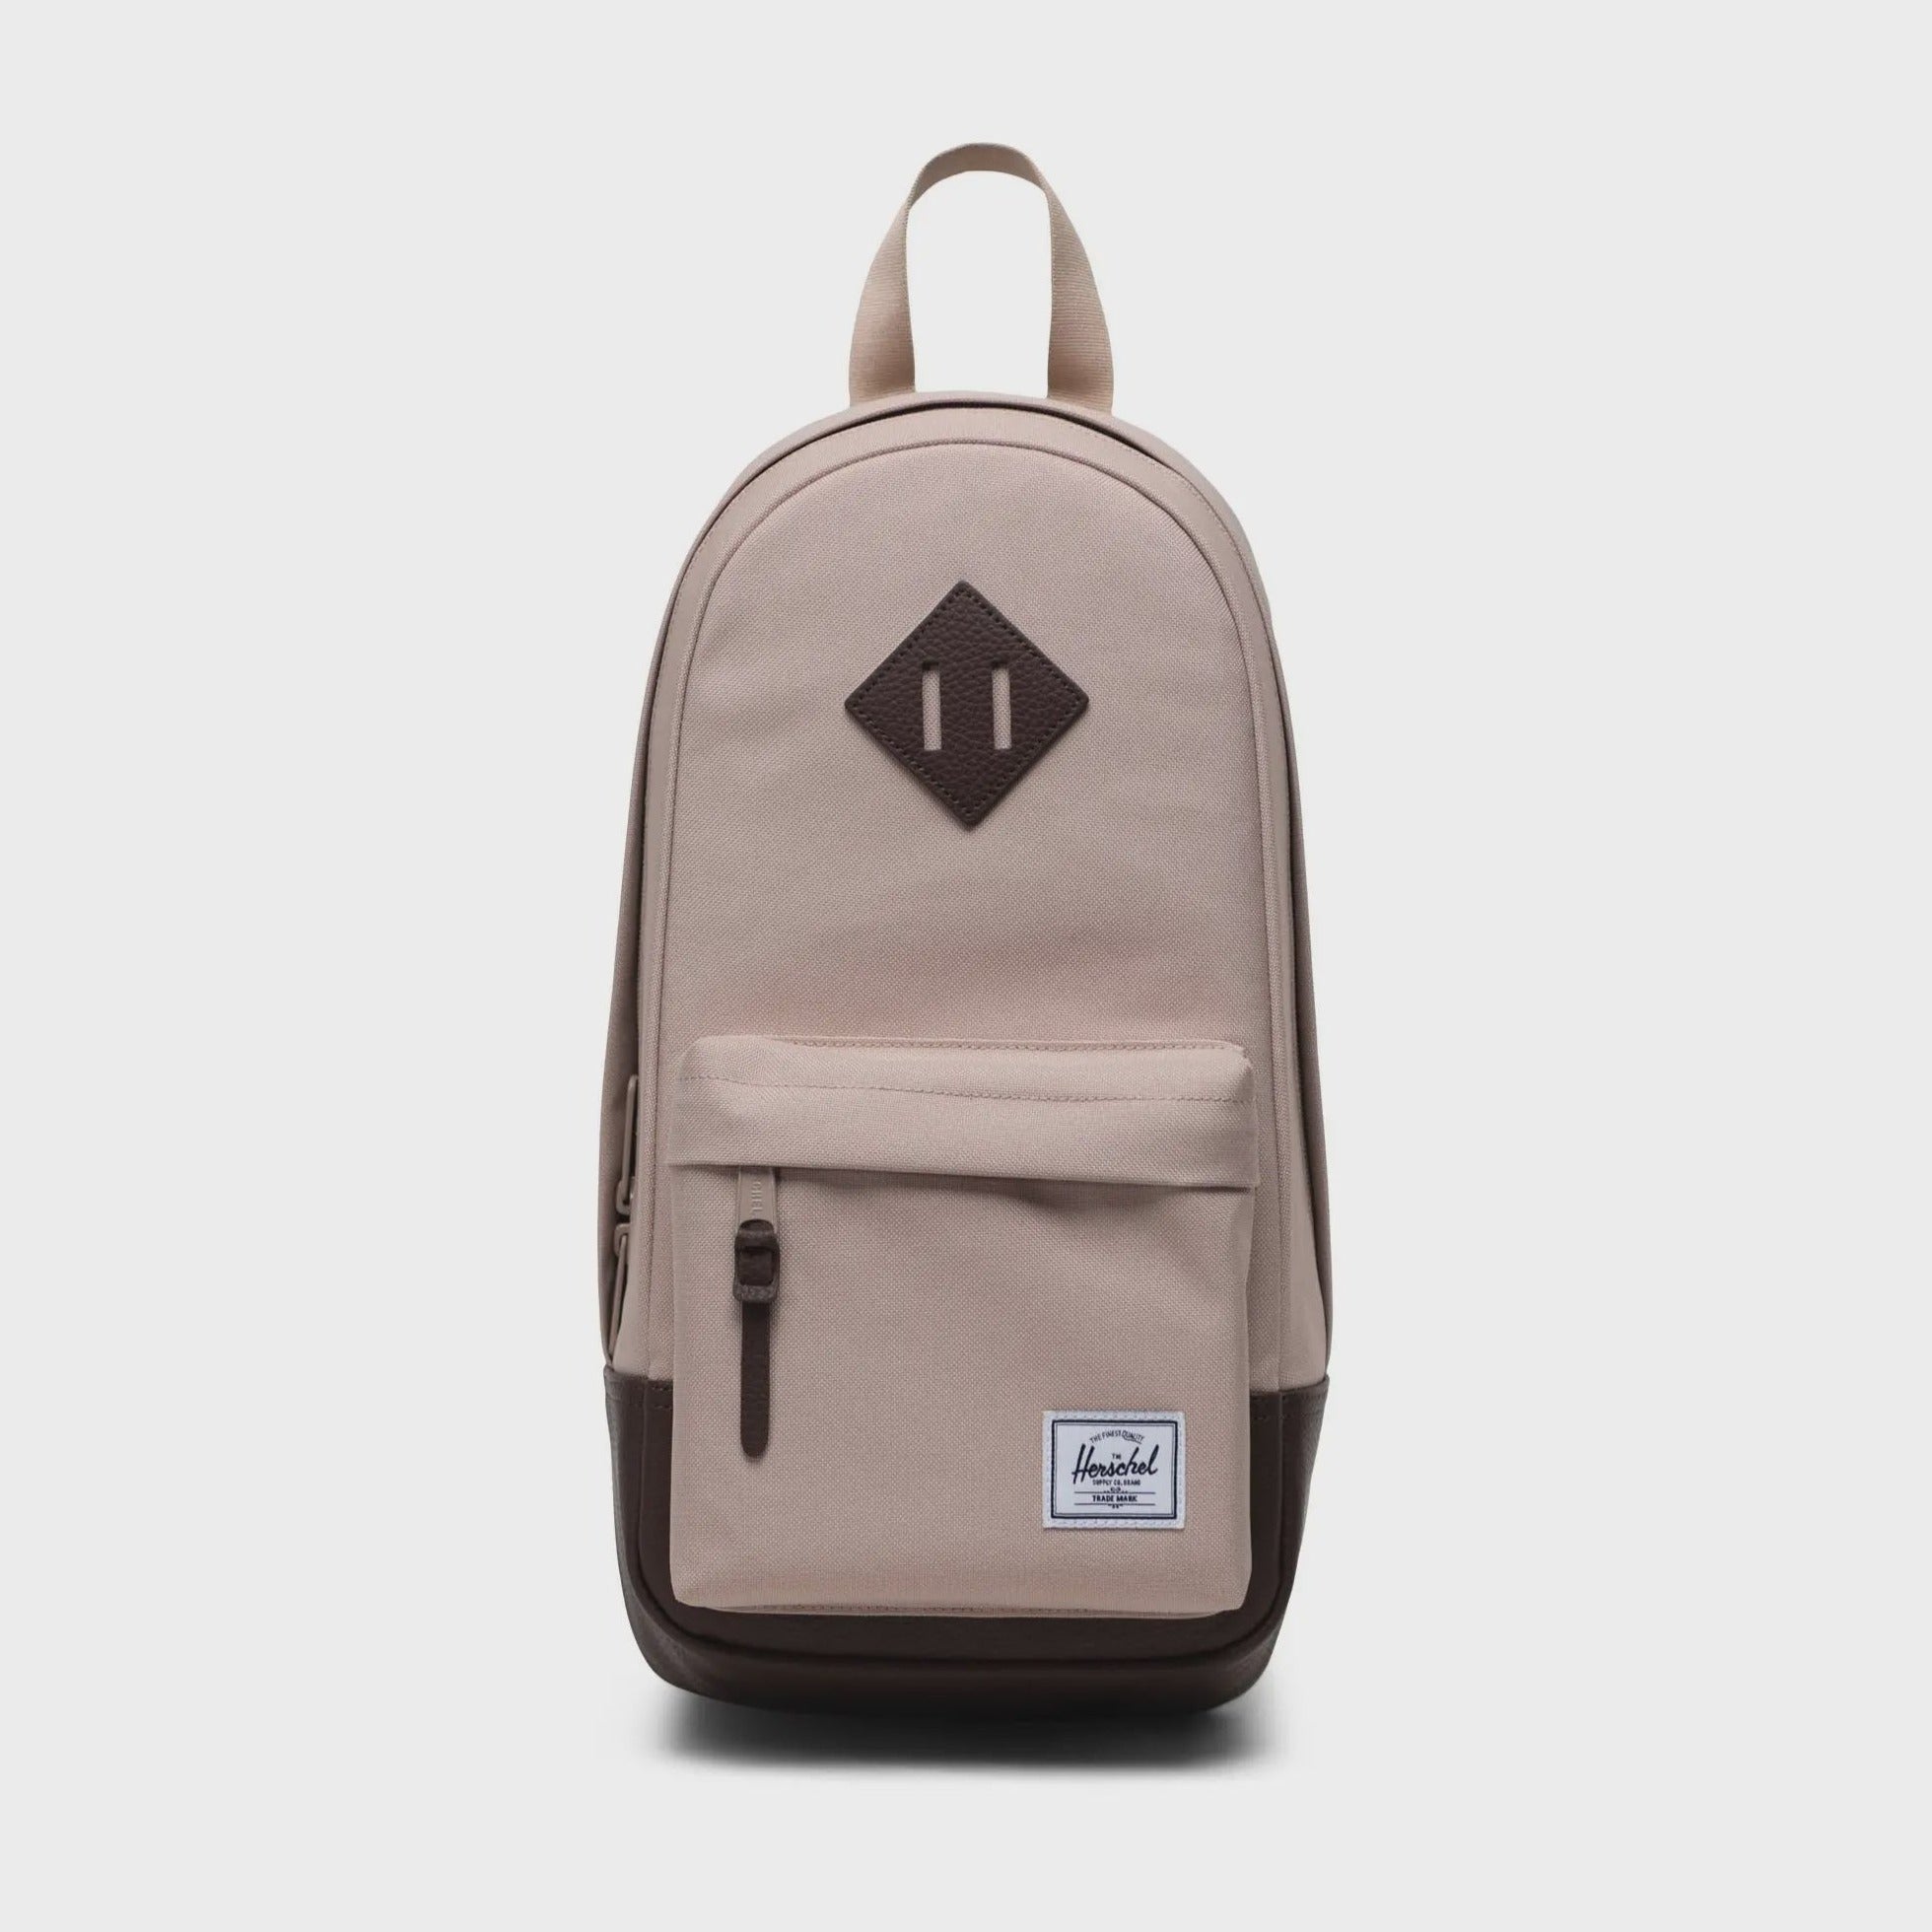 HERSCHEL - HERITAGE SHOULDER BAG IN LIGHT TAUPE/CHICORY COFFEE